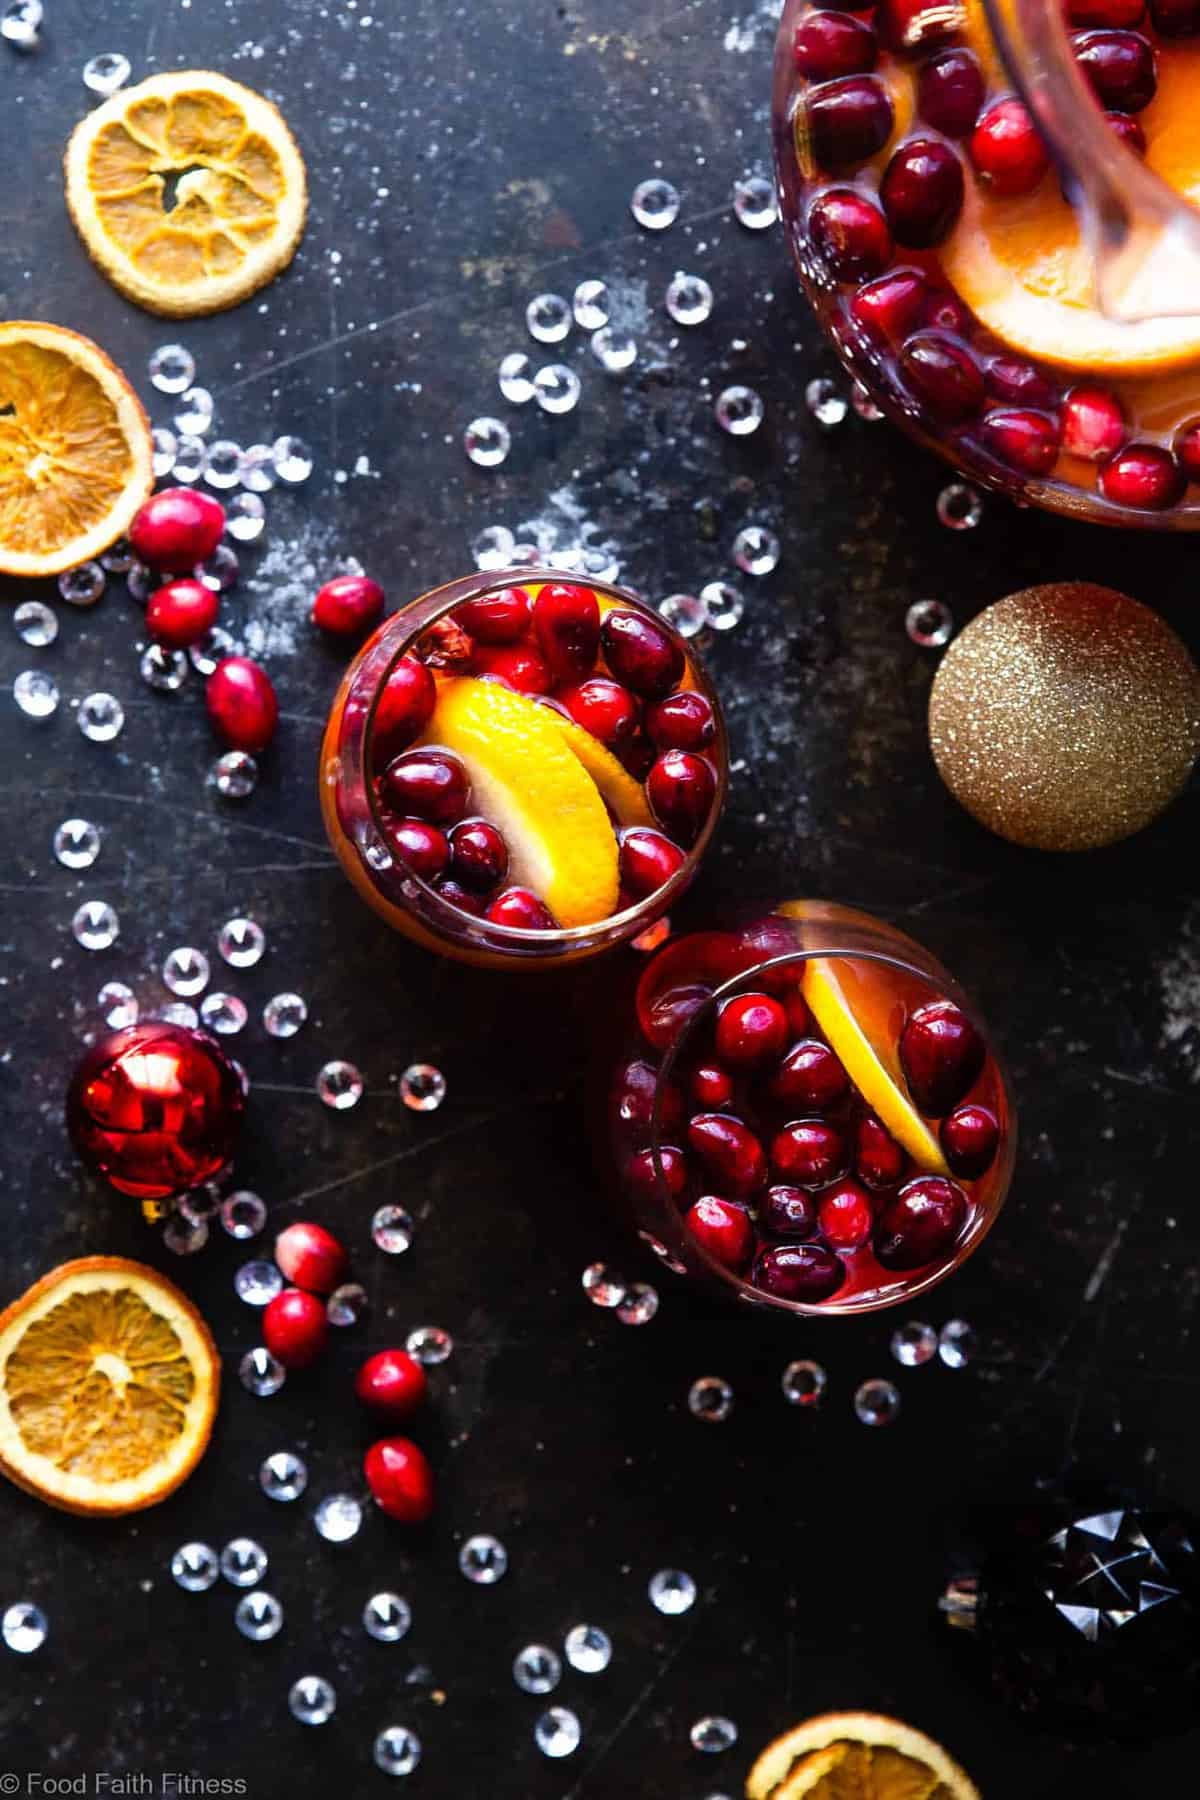 Sparkling Holiday Champagne Sangria - Full of tart cranberries and sweet oranges, this is an easy, better-for-you cocktail that is perfect to serve a crowd this Holiday season! Fizzy, festive and tasty! | #Foodfaithfitness | 